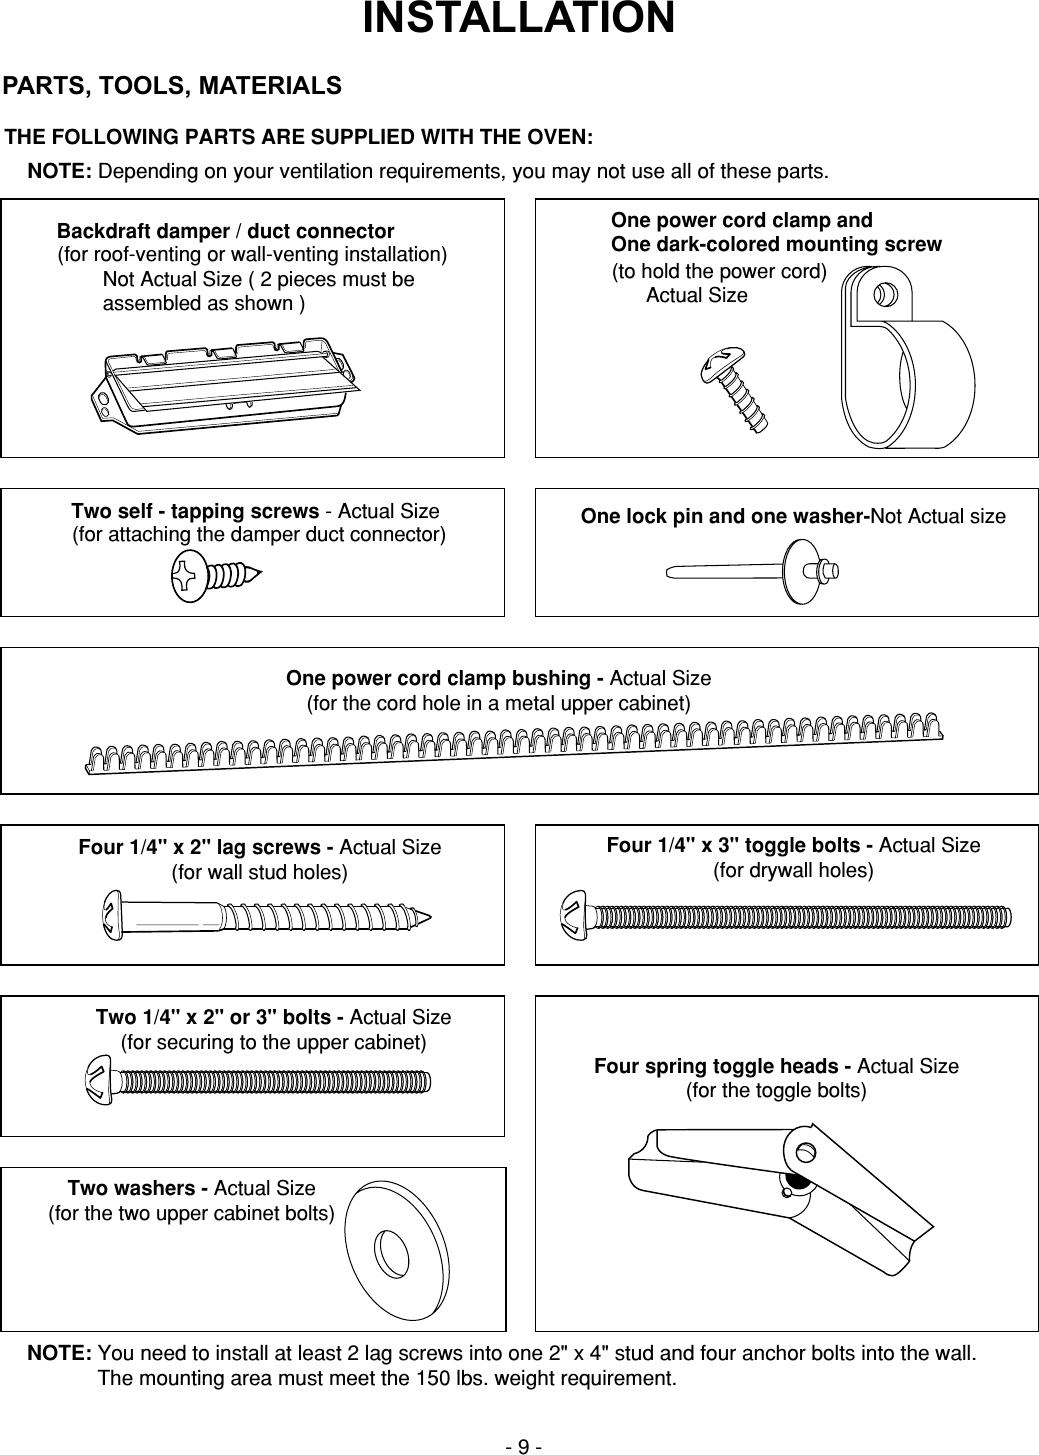 THE FOLLOWING PARTS ARE SUPPLIED WITH THE OVEN:NOTE: Depending on your ventilation requirements, you may not use all of these parts.NOTE: You need to install at least 2 lag screws into one 2&quot; x 4&quot; stud and four anchor bolts into the wall.The mounting area must meet the 150 lbs. weight requirement.- 9 -Backdraft damper / duct connector(for roof-venting or wall-venting installation)        Not Actual Size ( 2 pieces must be        assembled as shown )One power cord clamp andOne dark-colored mounting screw(to hold the power cord)      Actual SizeFour 1/4&quot; x 2&quot; lag screws - Actual Size(for wall stud holes)Two 1/4&quot; x 2&quot; or 3&quot; bolts - Actual Size(for securing to the upper cabinet)Four spring toggle heads - Actual Size(for the toggle bolts)Two washers - Actual Size(for the two upper cabinet bolts)Four 1/4&quot; x 3&quot; toggle bolts - Actual Size(for drywall holes)One power cord clamp bushing - Actual Size(for the cord hole in a metal upper cabinet)One lock pin and one washer-Not Actual sizeINSTALLATIONPARTS, TOOLS, MATERIALSTwo self - tapping screws - Actual Size(for attaching the damper duct connector)